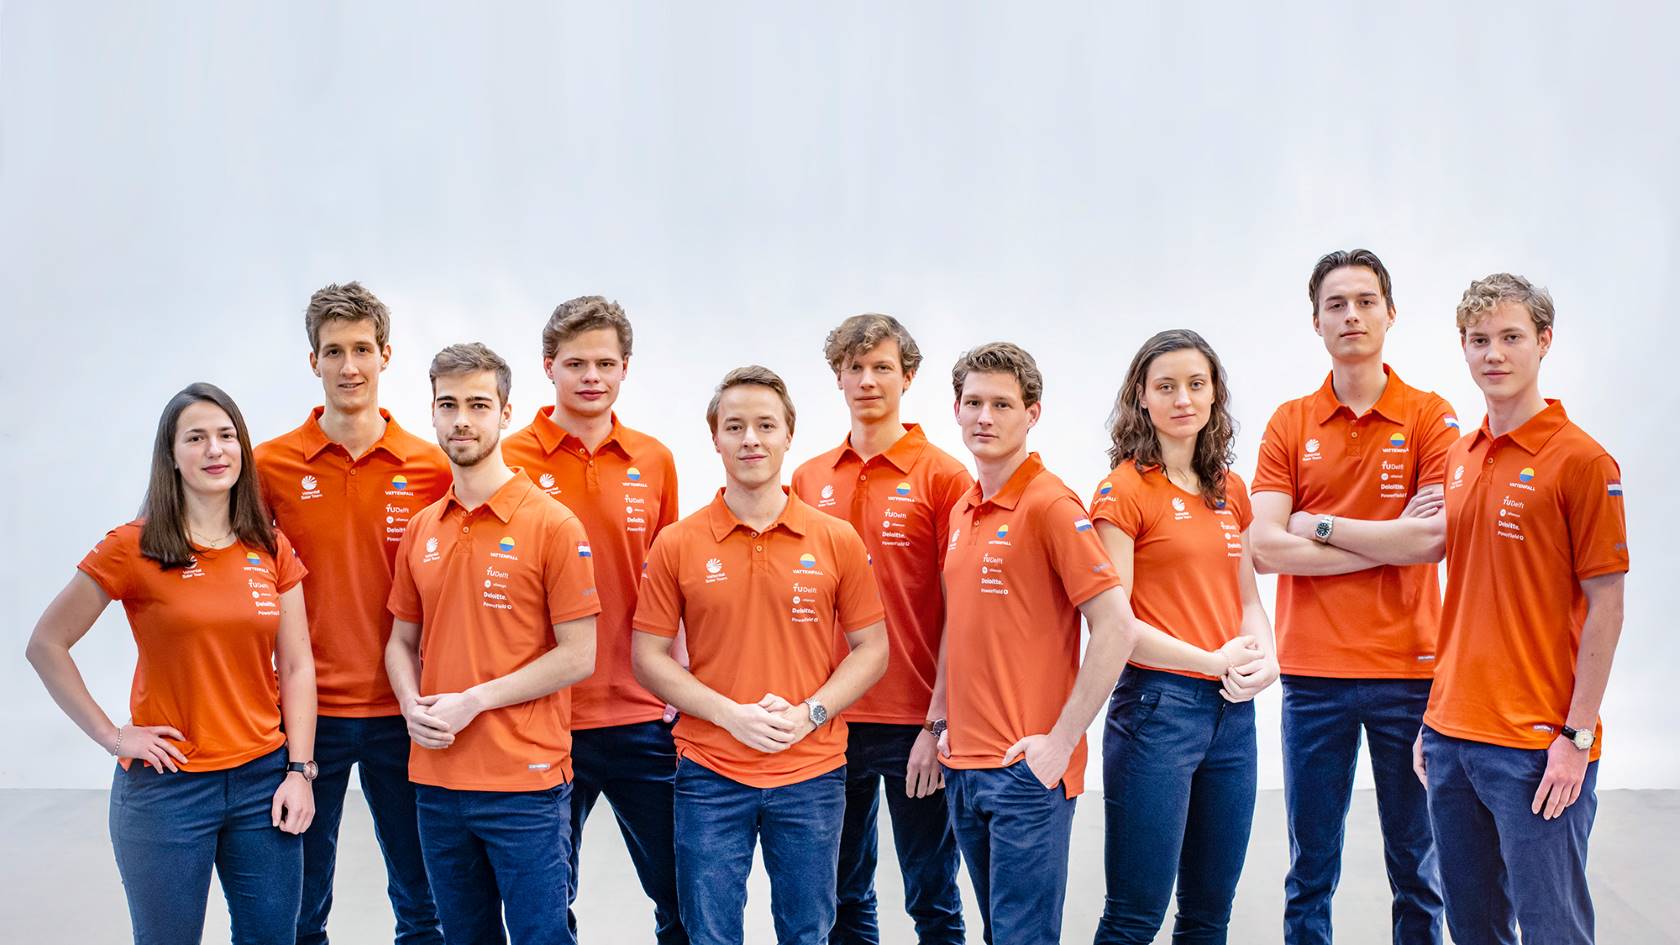 Vattenfall Solar Team 2020 - The new team of students from Delft University of Technology.